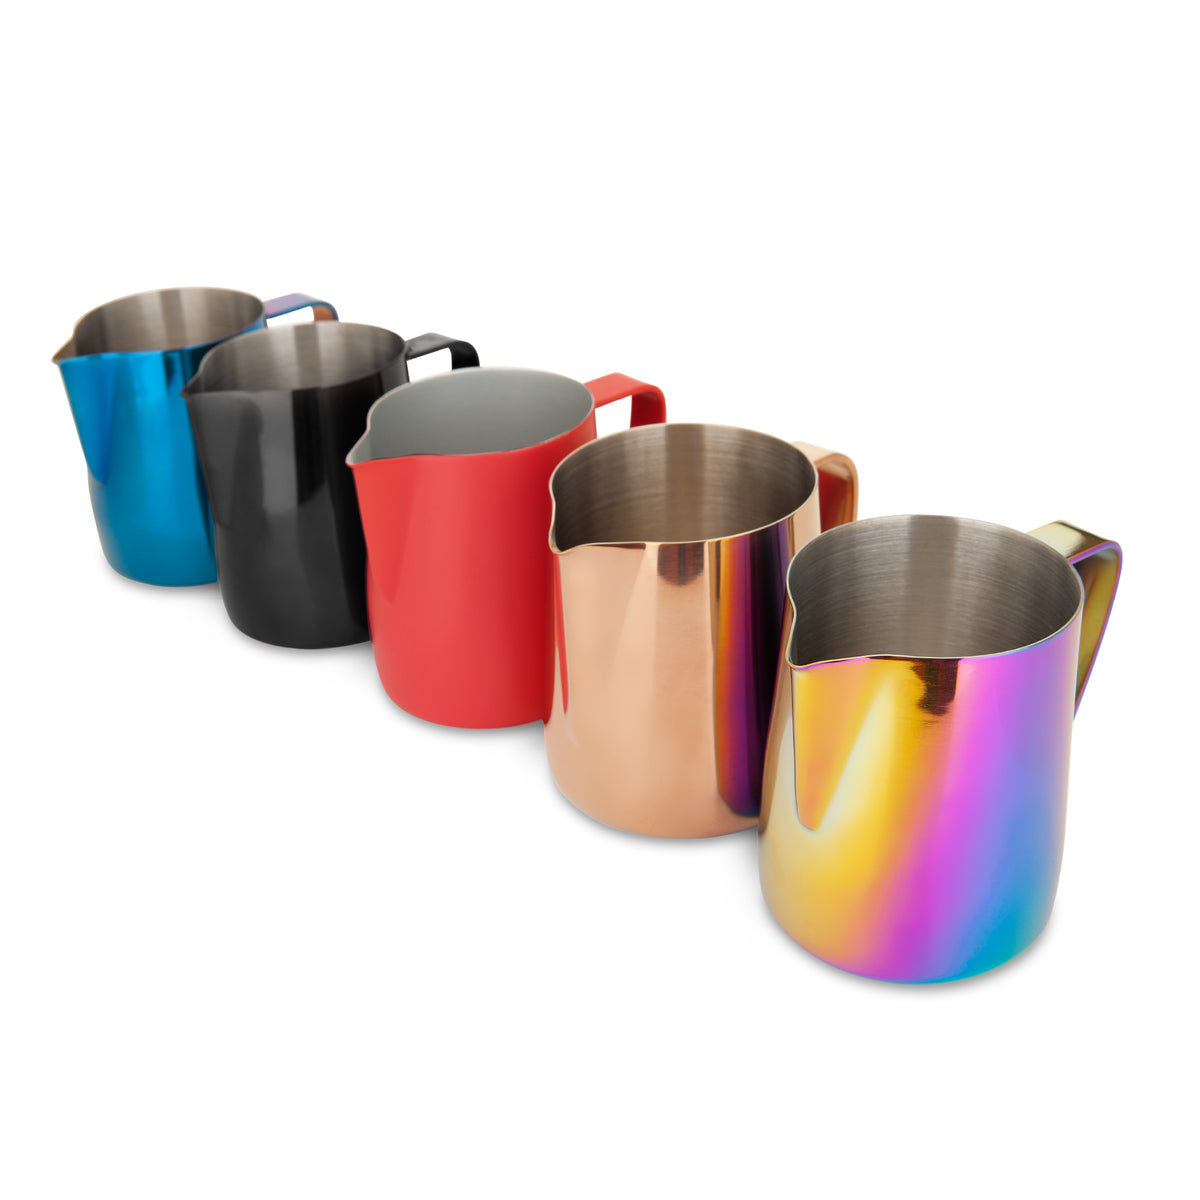 All colors of the EspressoWorks Stainless Steel Milk Frothing Jug